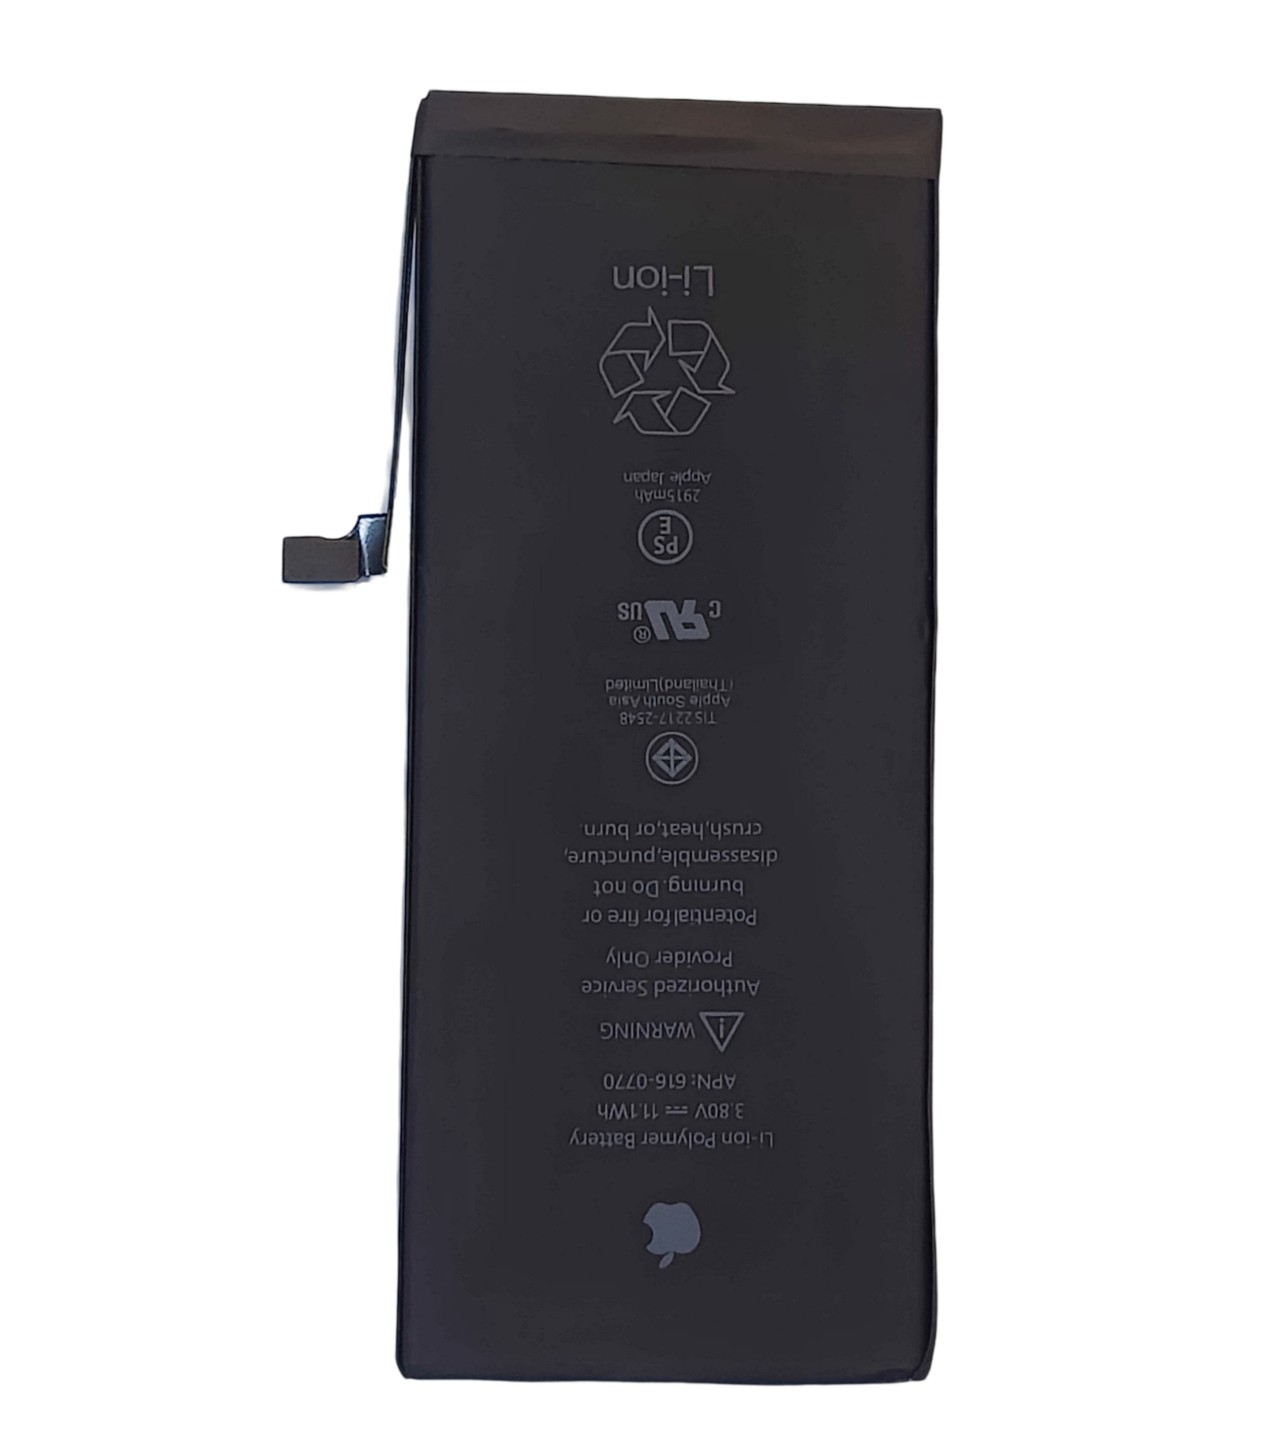 Apple iPhone 6+ / 6G Plus / 6Plus  Battery Replacement with 2750mAh Capacity